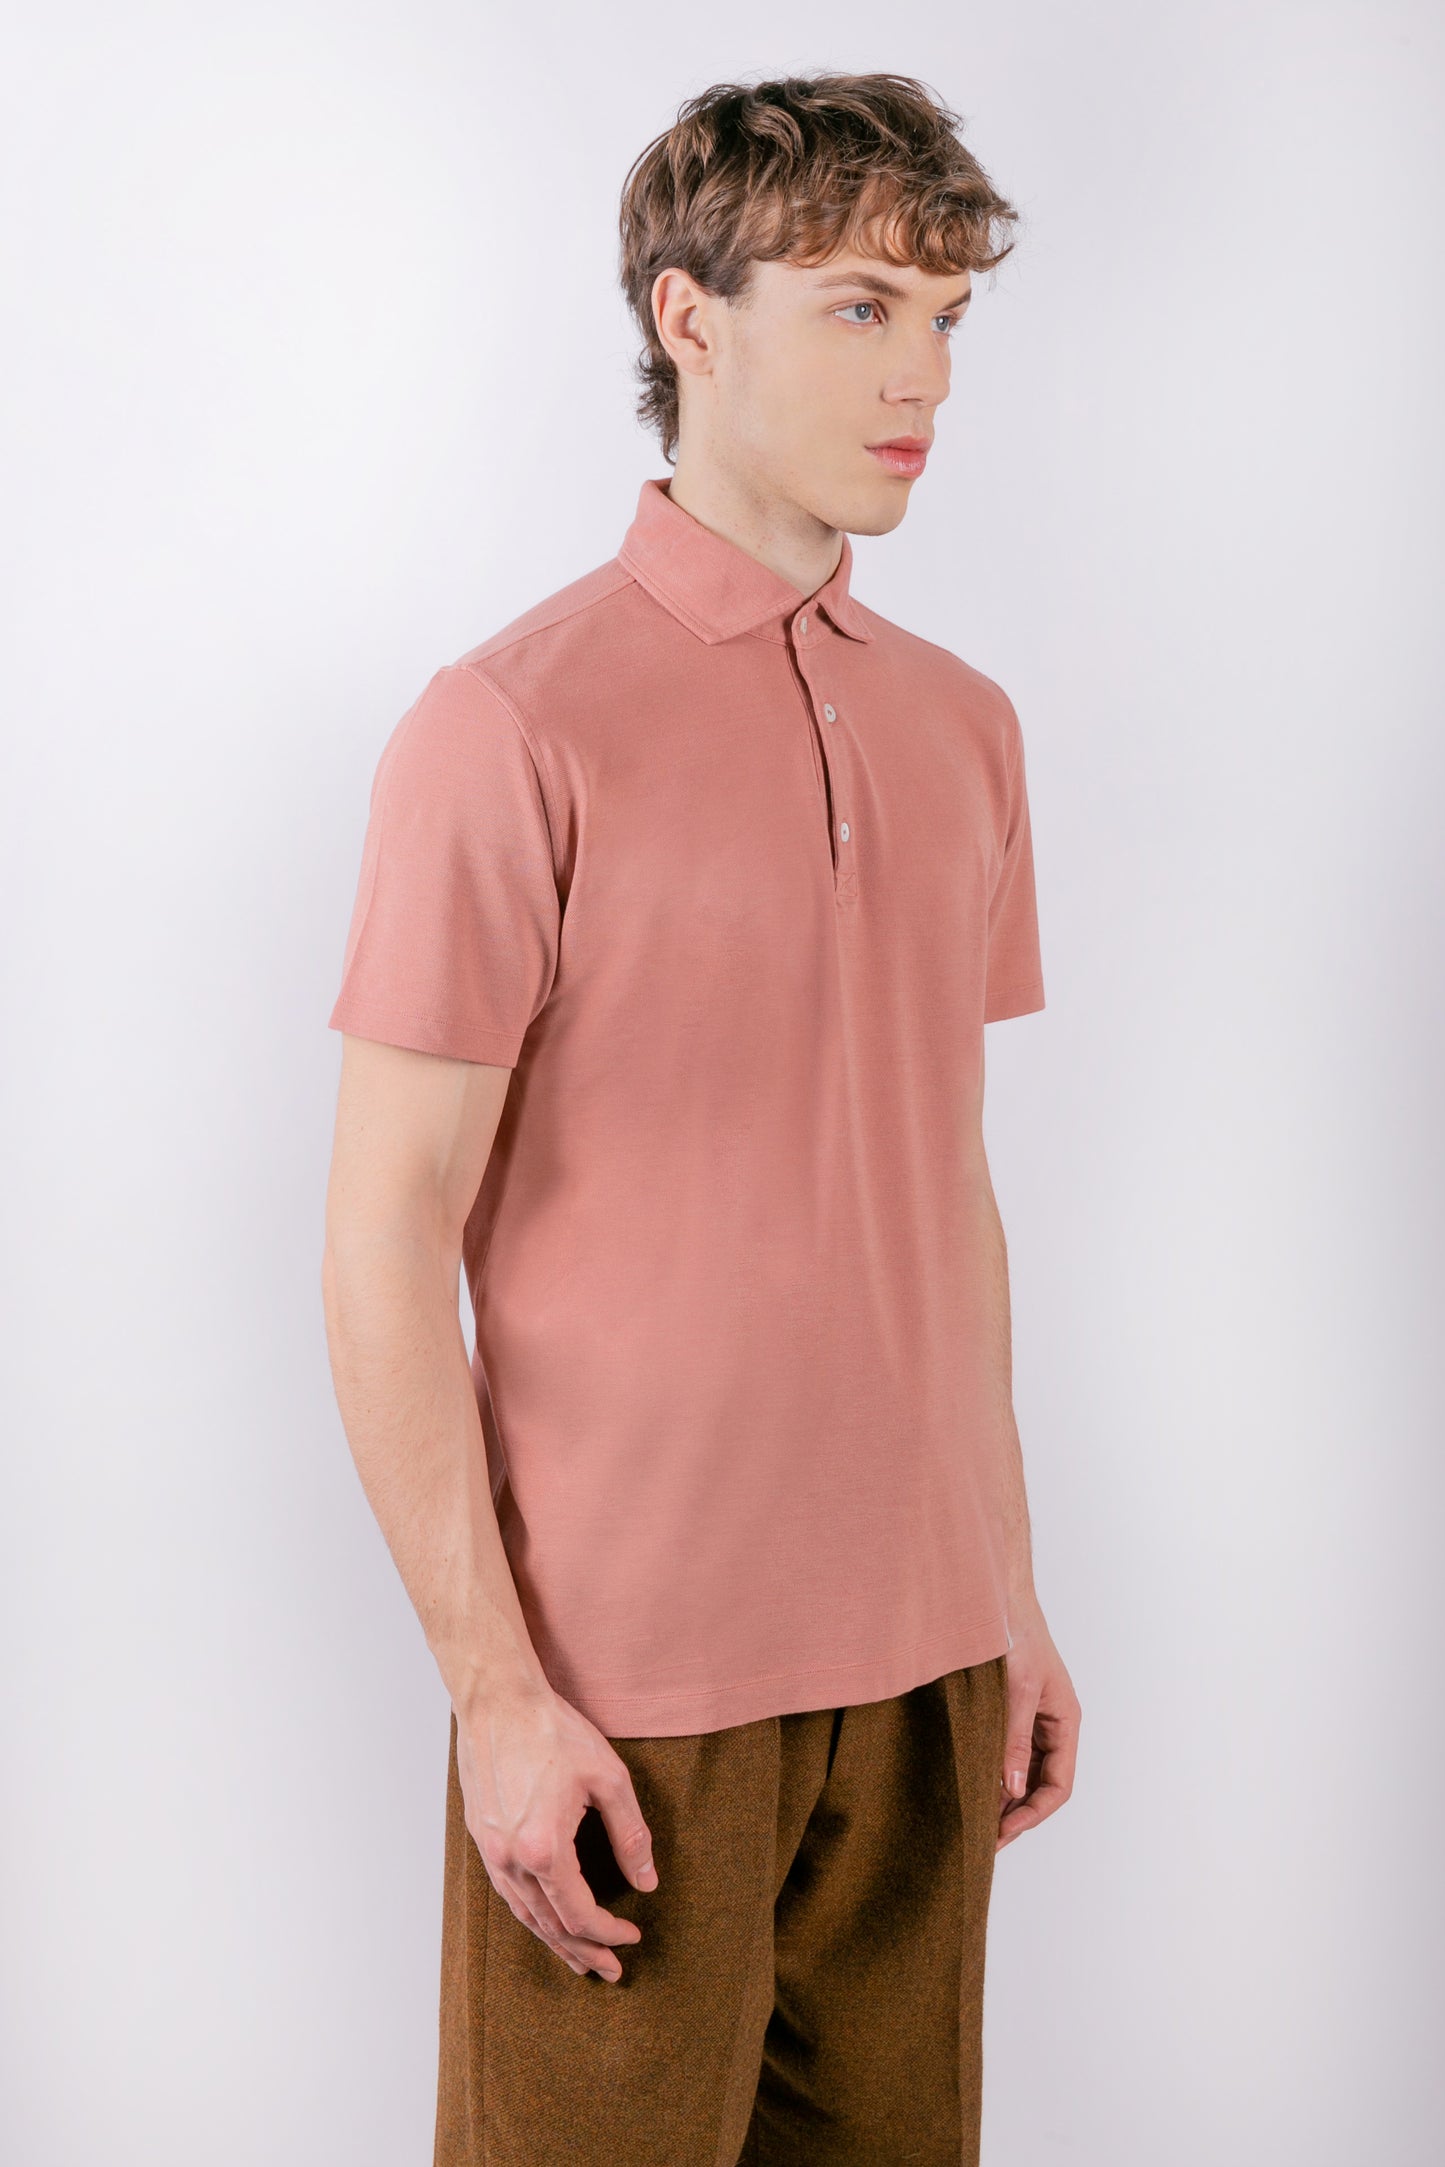 Short-sleeved pink piqué polo shirt with 3 buttons